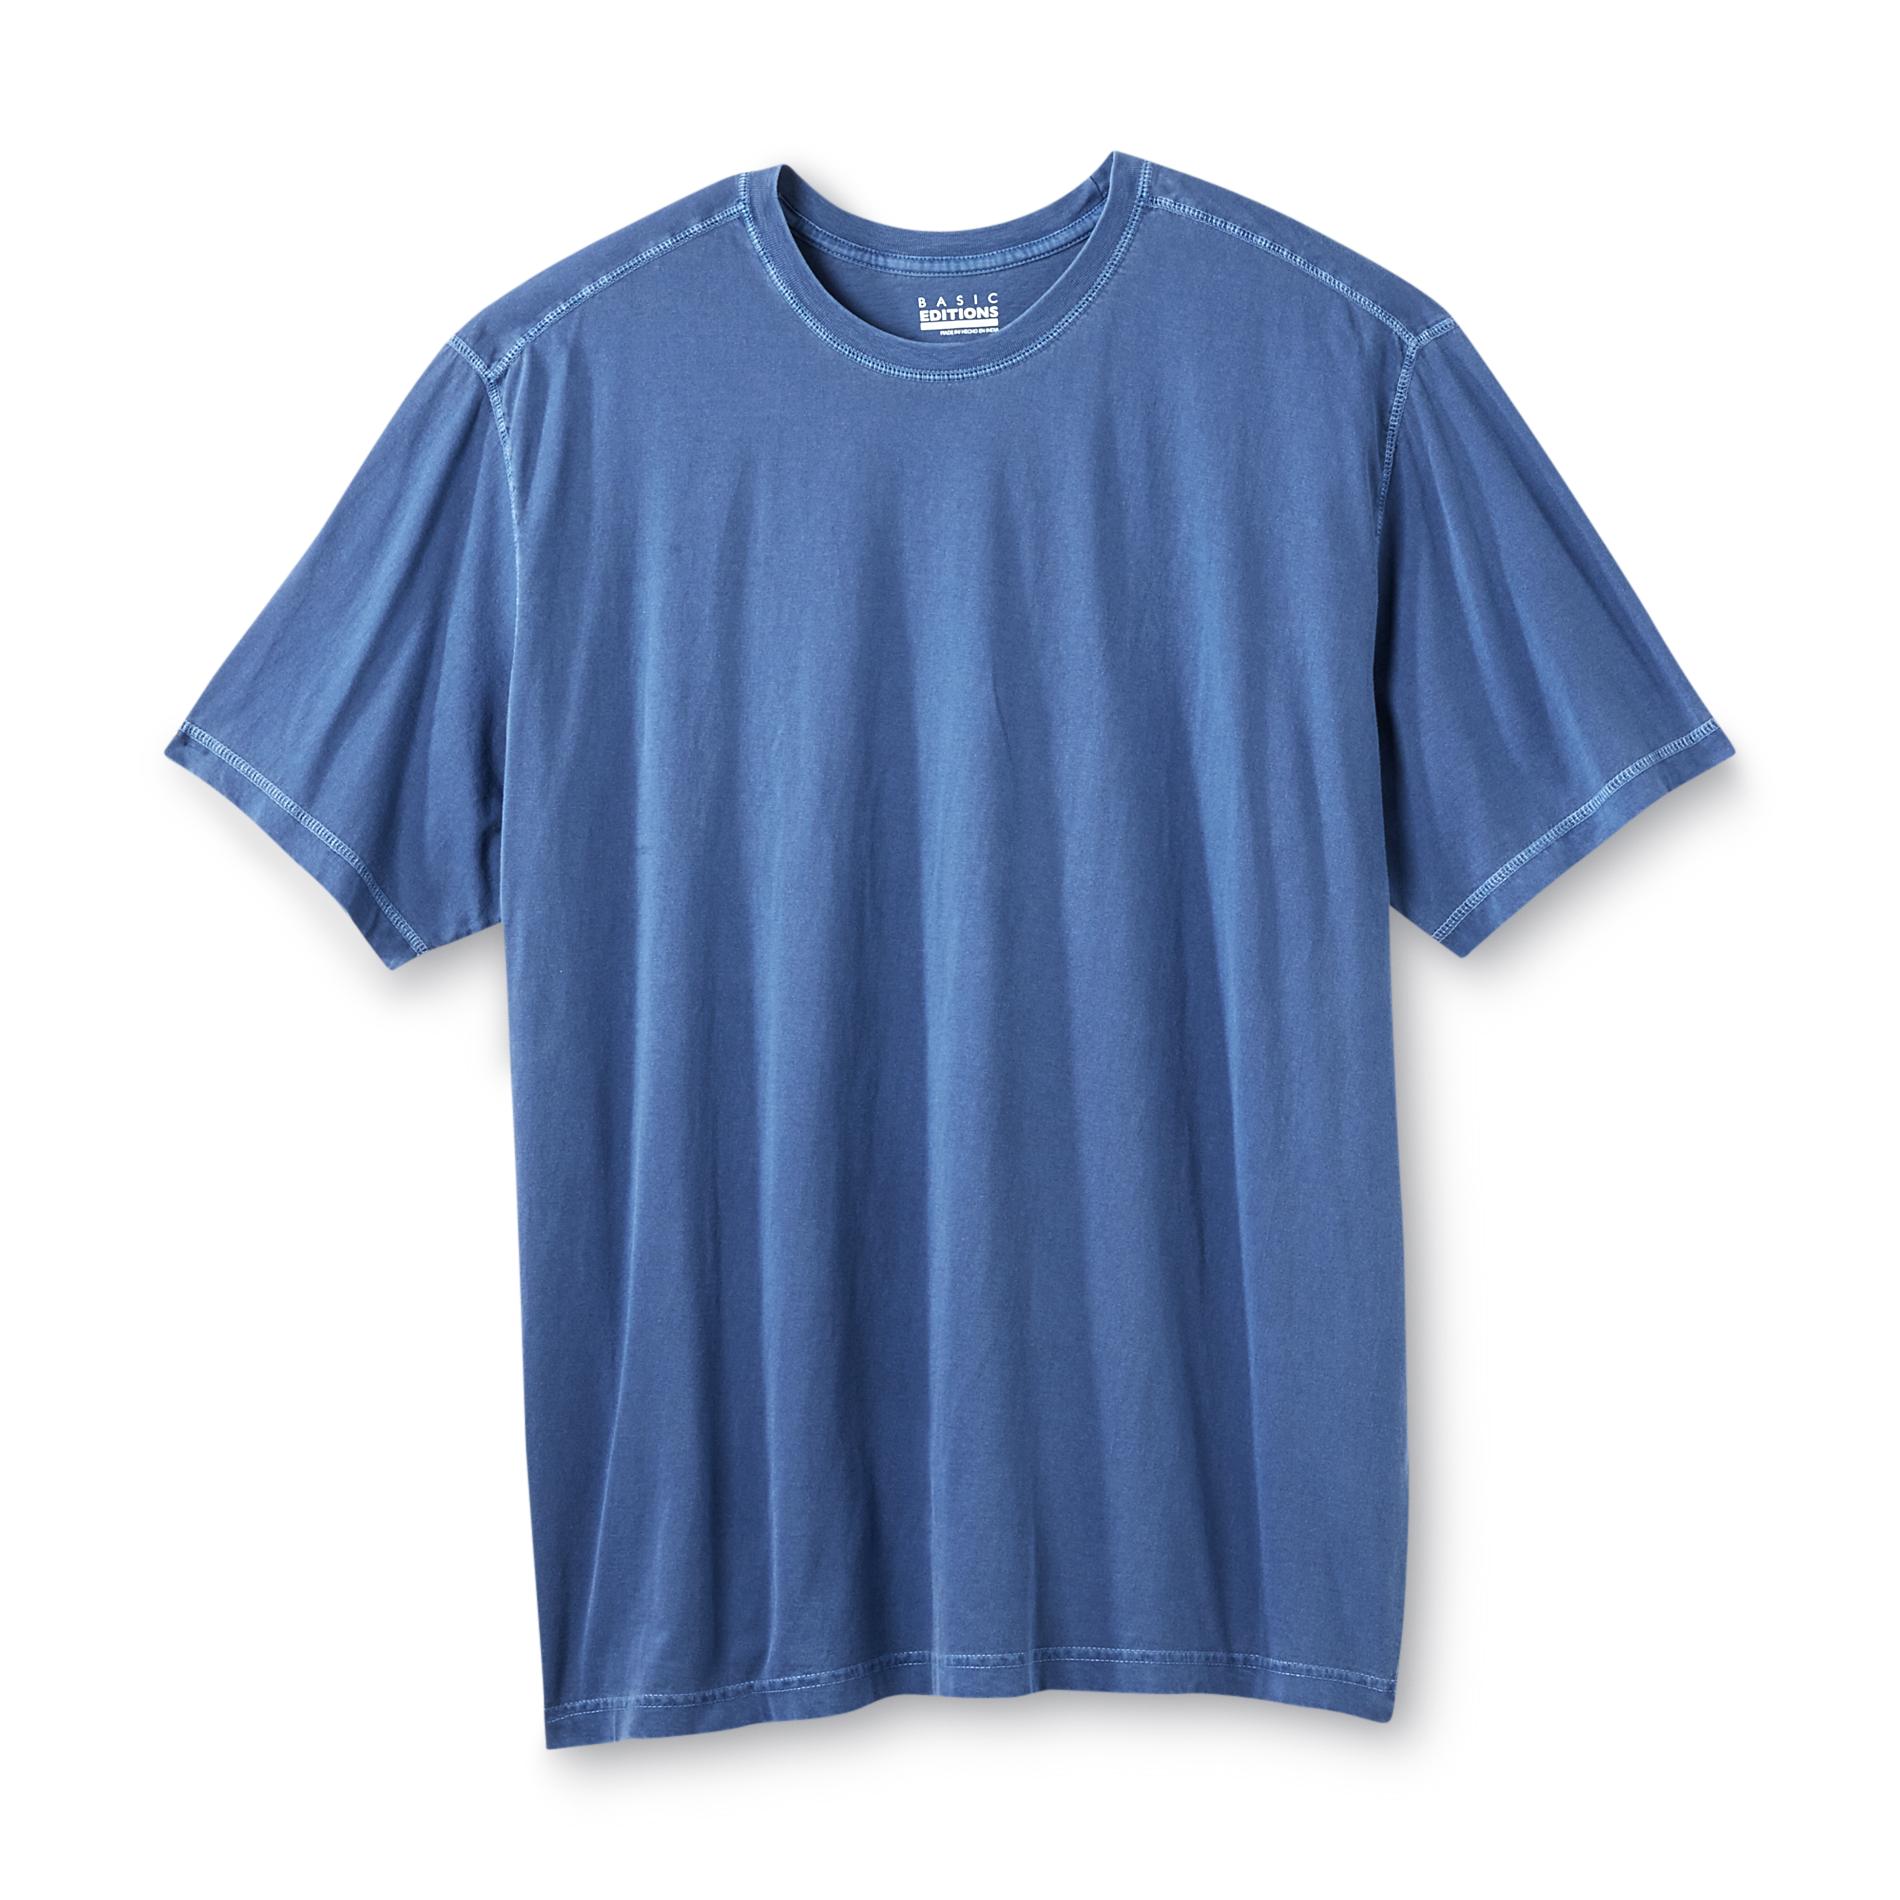 Basic Editions Men's Big & Tall T-Shirt - Pigment Dyed